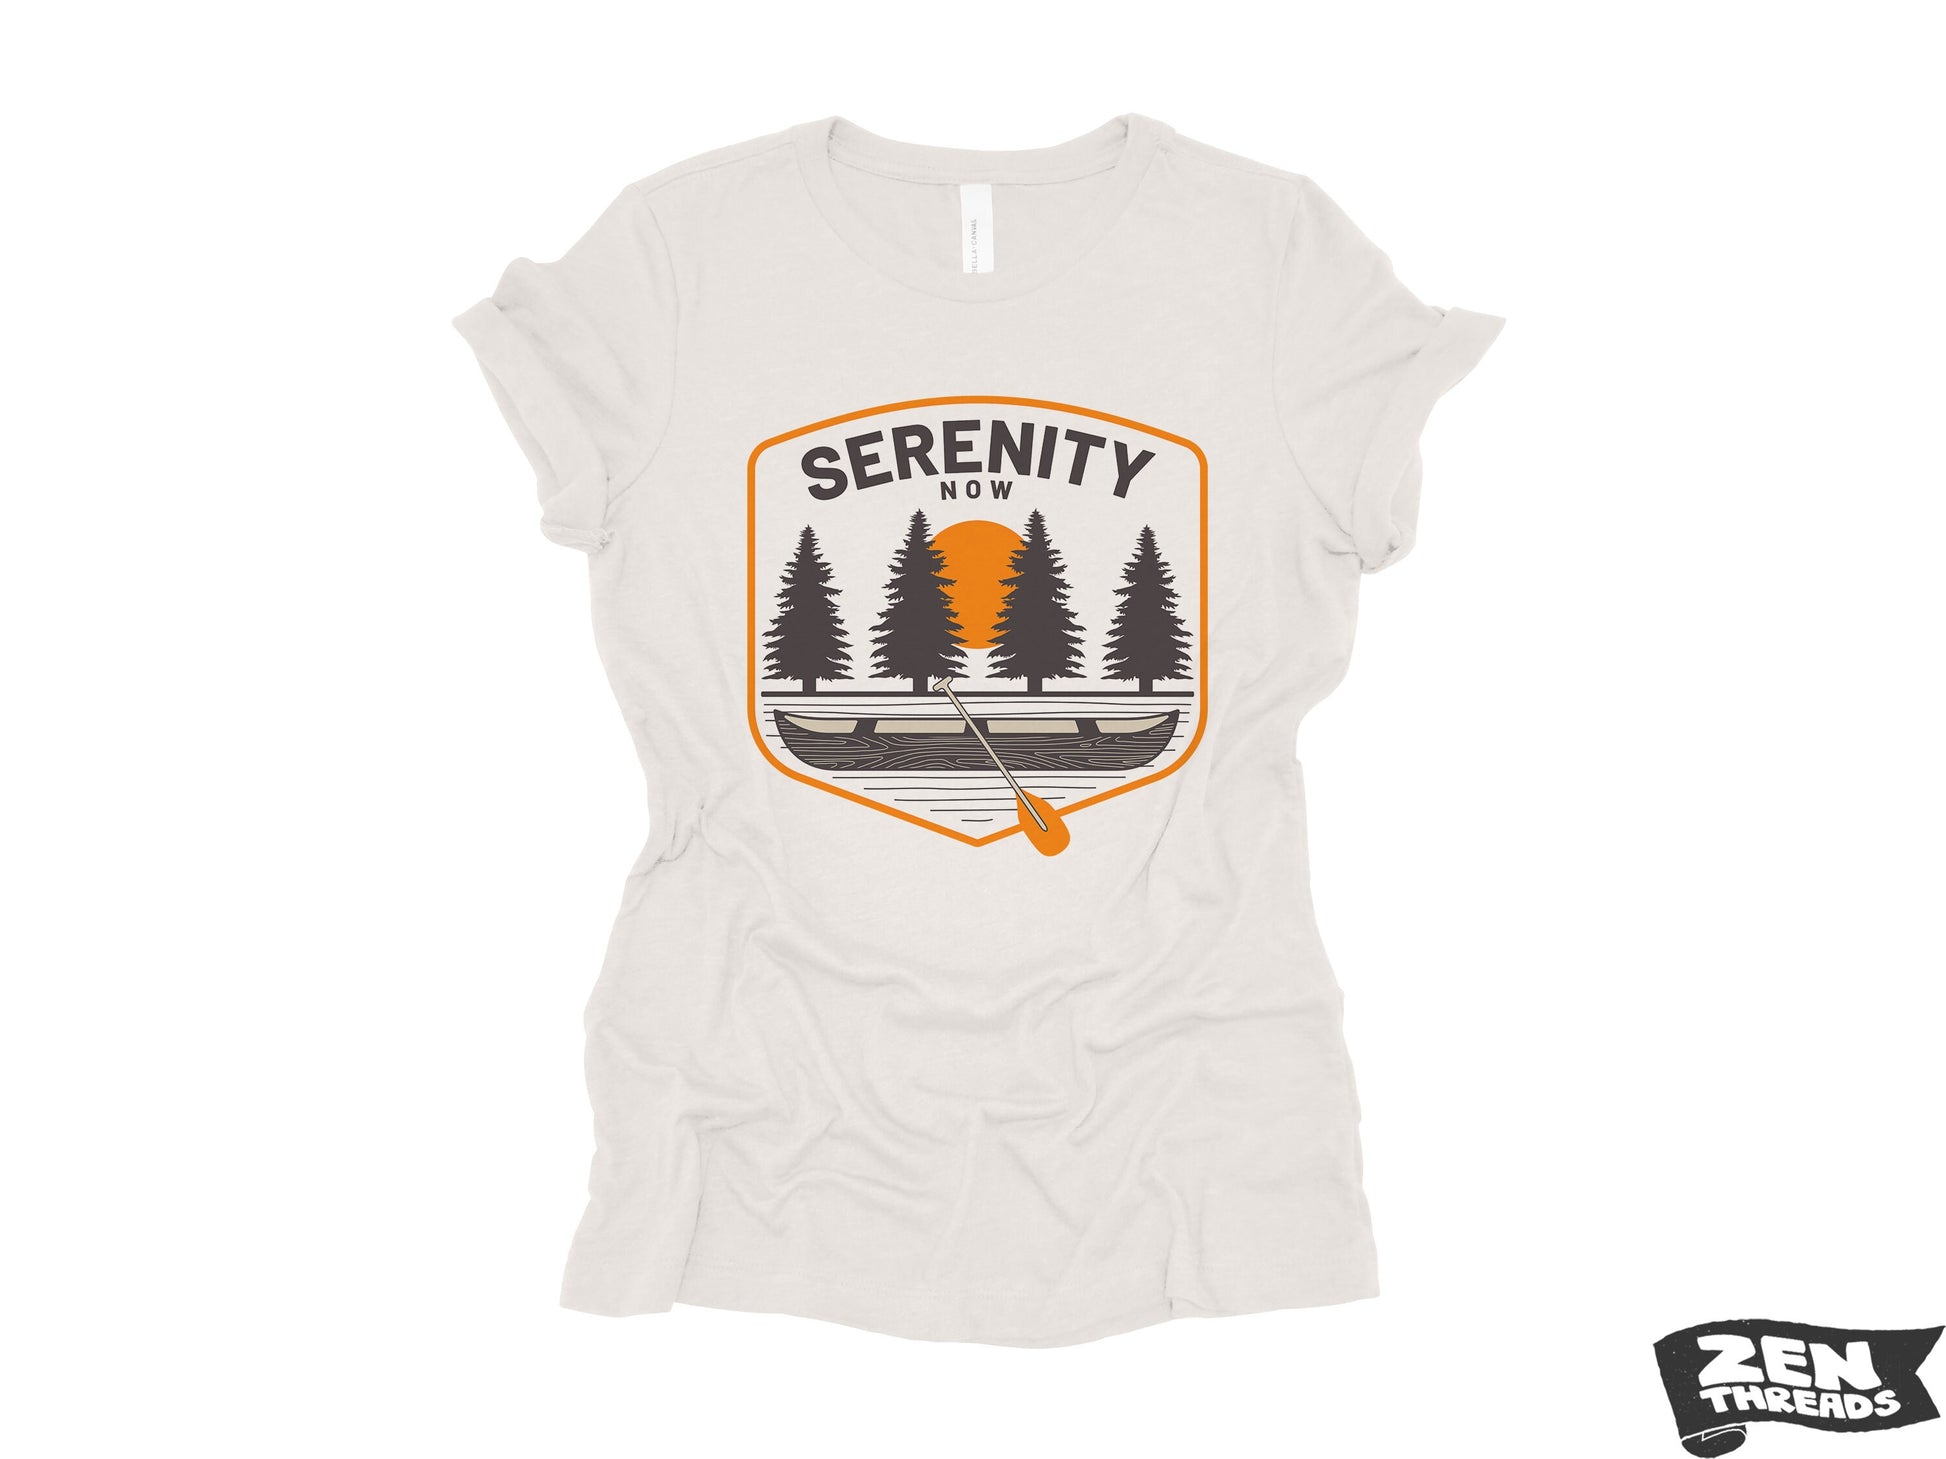 Womens SERENITY Now Boyfriend Tee relaxed jersey T-shirt Zen Threads + Bella Canvas 6400 custom ladies crew camping outdoors kayak paddle